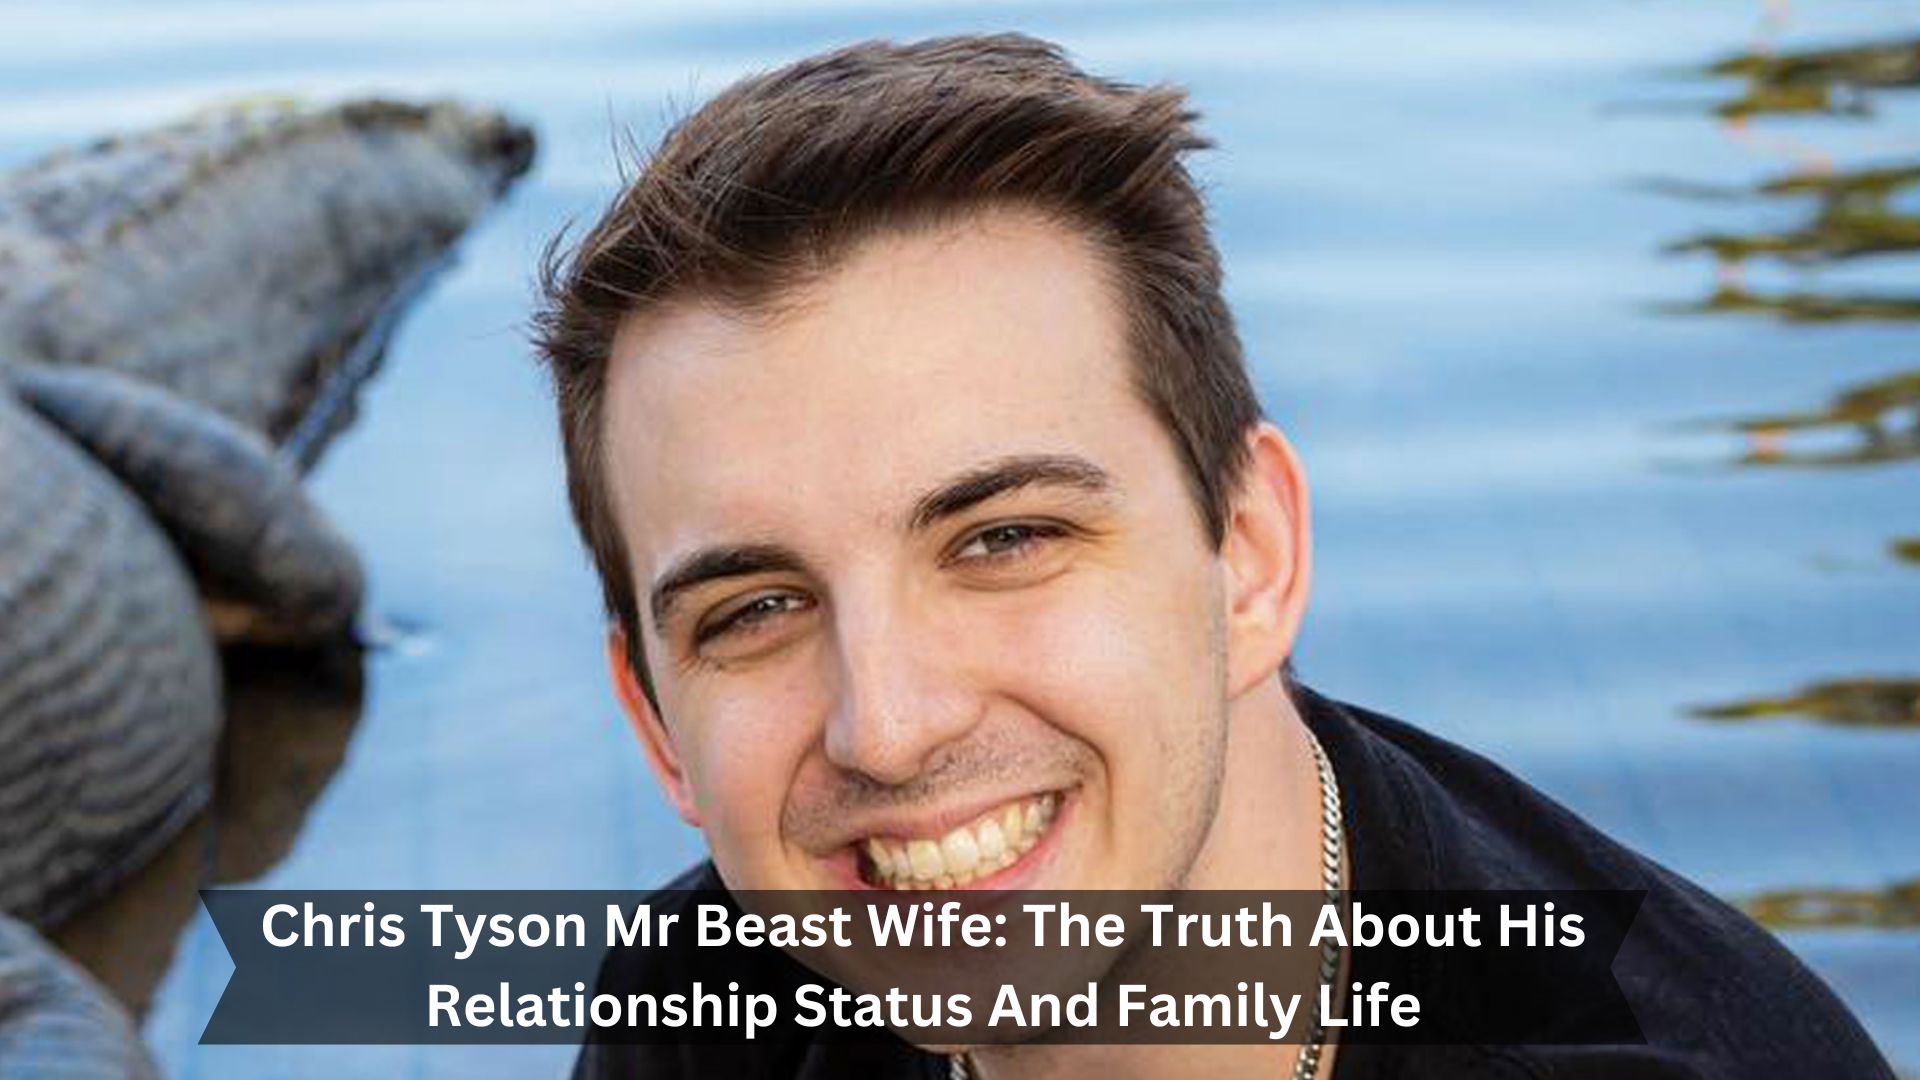 Chris-Tyson-Mr-Beast-Wife-The-Truth-About-His-Relationship-Status-And-Family-Life